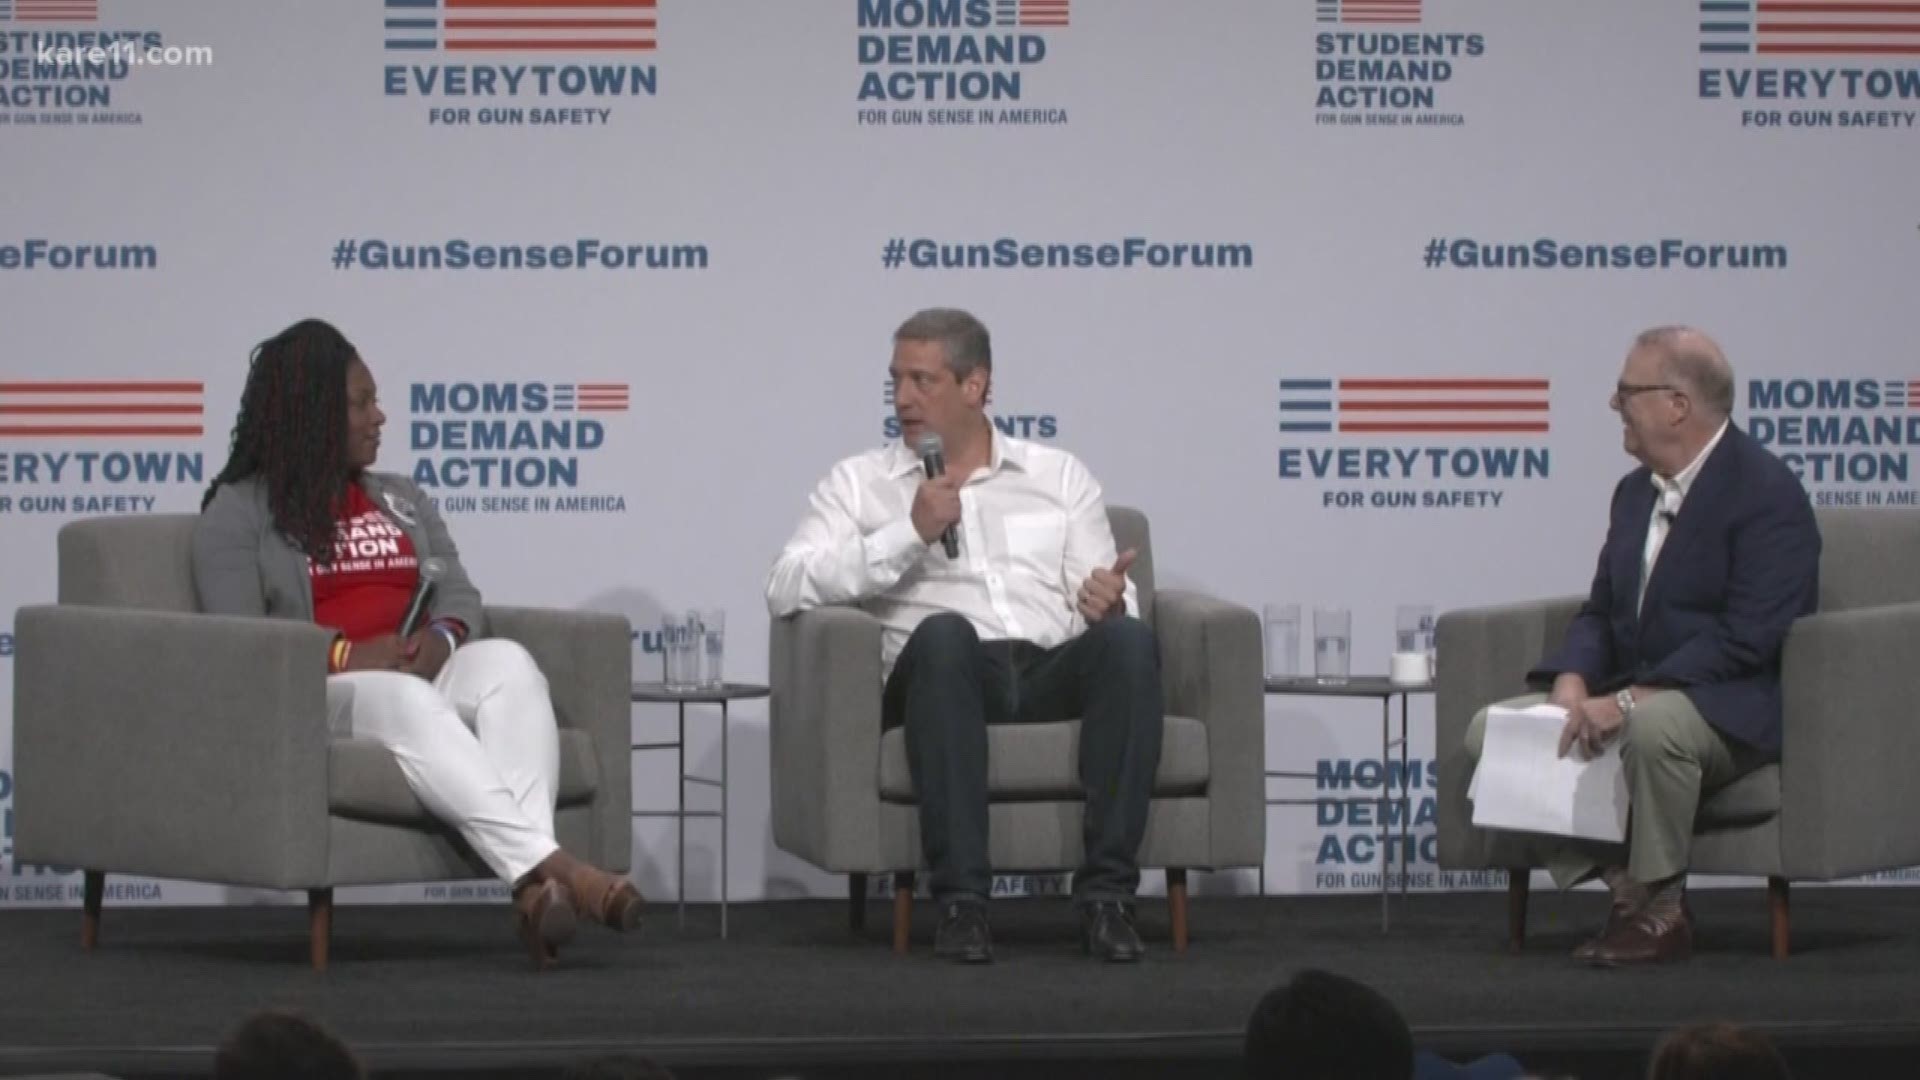 The candidates spoke and took questions at the forum arranged by Everytown for Gun Safety.